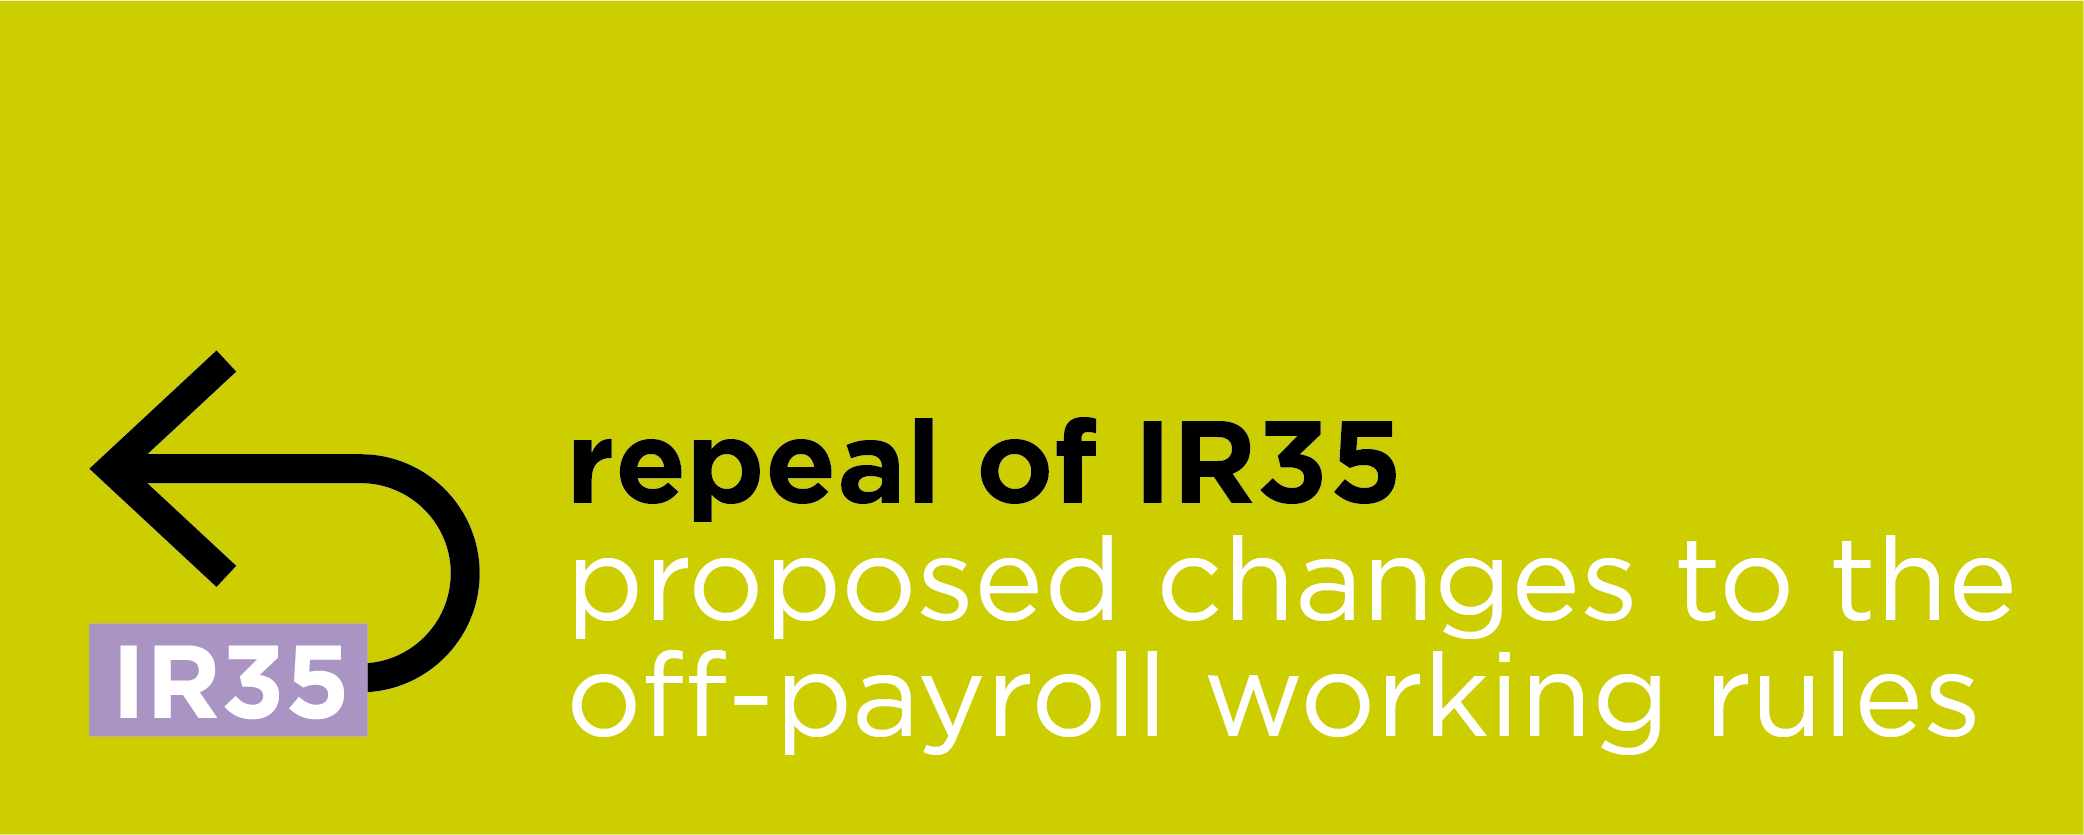 Repeal of IR35 - Proposed changes to the off-payroll working rules